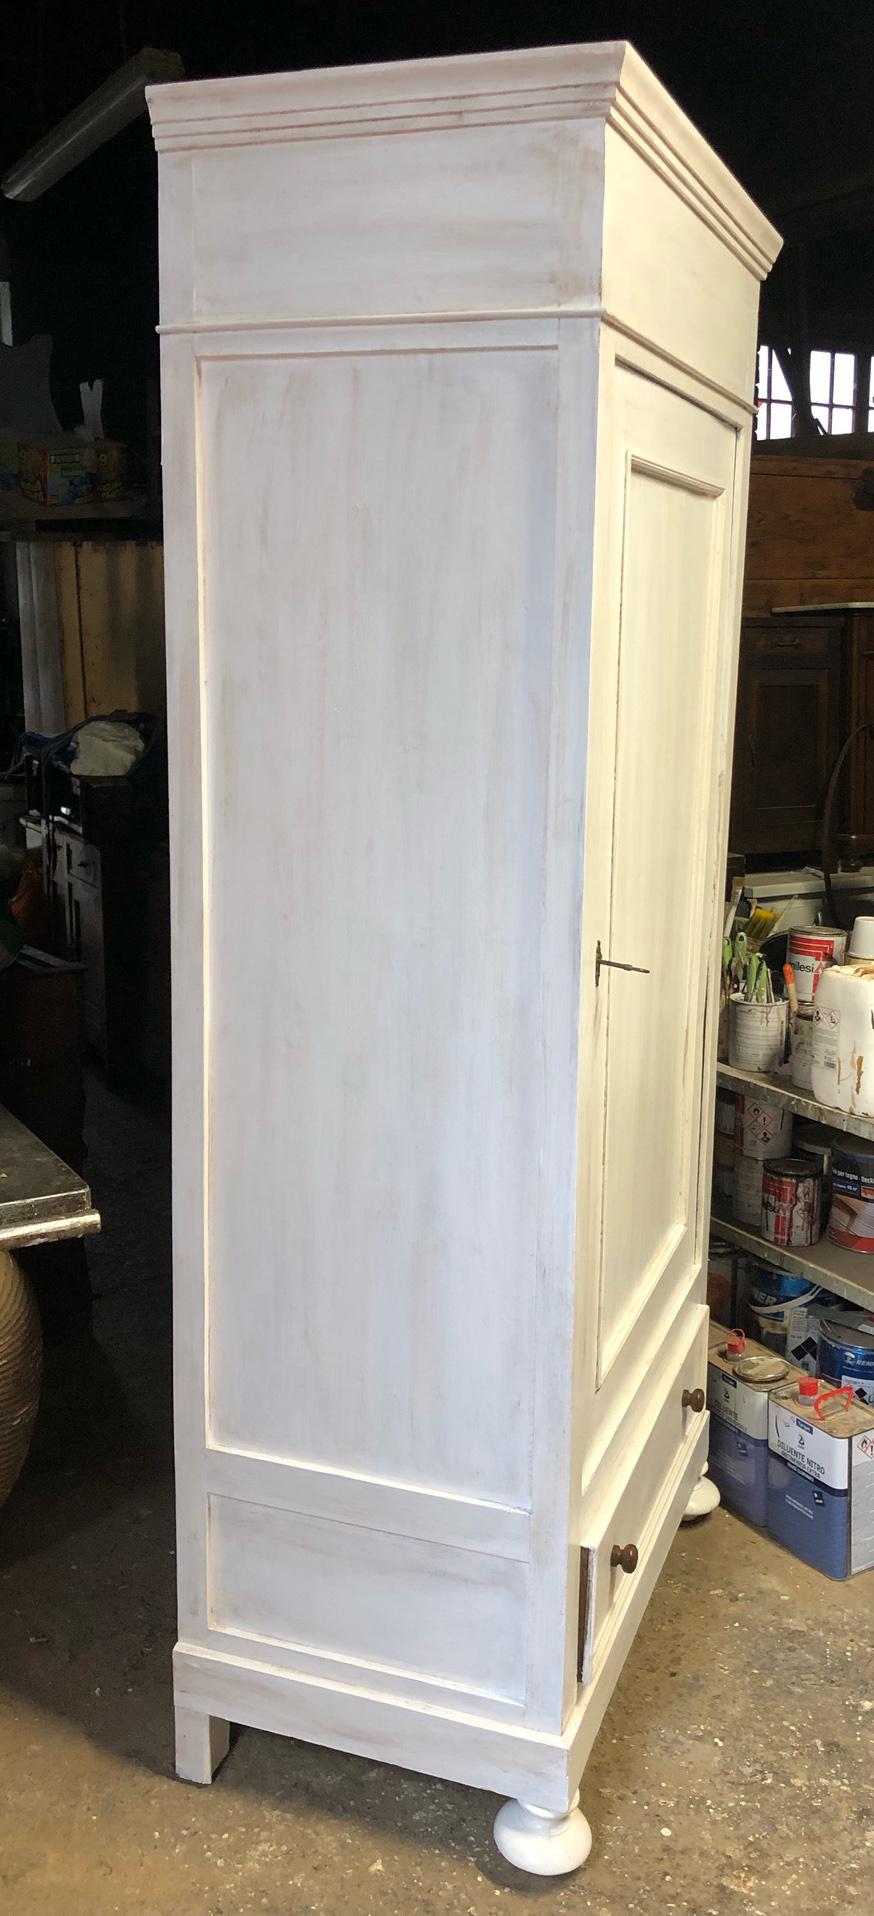 20th Century Single door wardrobe in fir, patinated white, with external drawer and clothes rail. Onion paws.
The furniture is not completely disassembled.
The internal useful depth is 50 cm.
Comes from an old country house in the Lucca area of